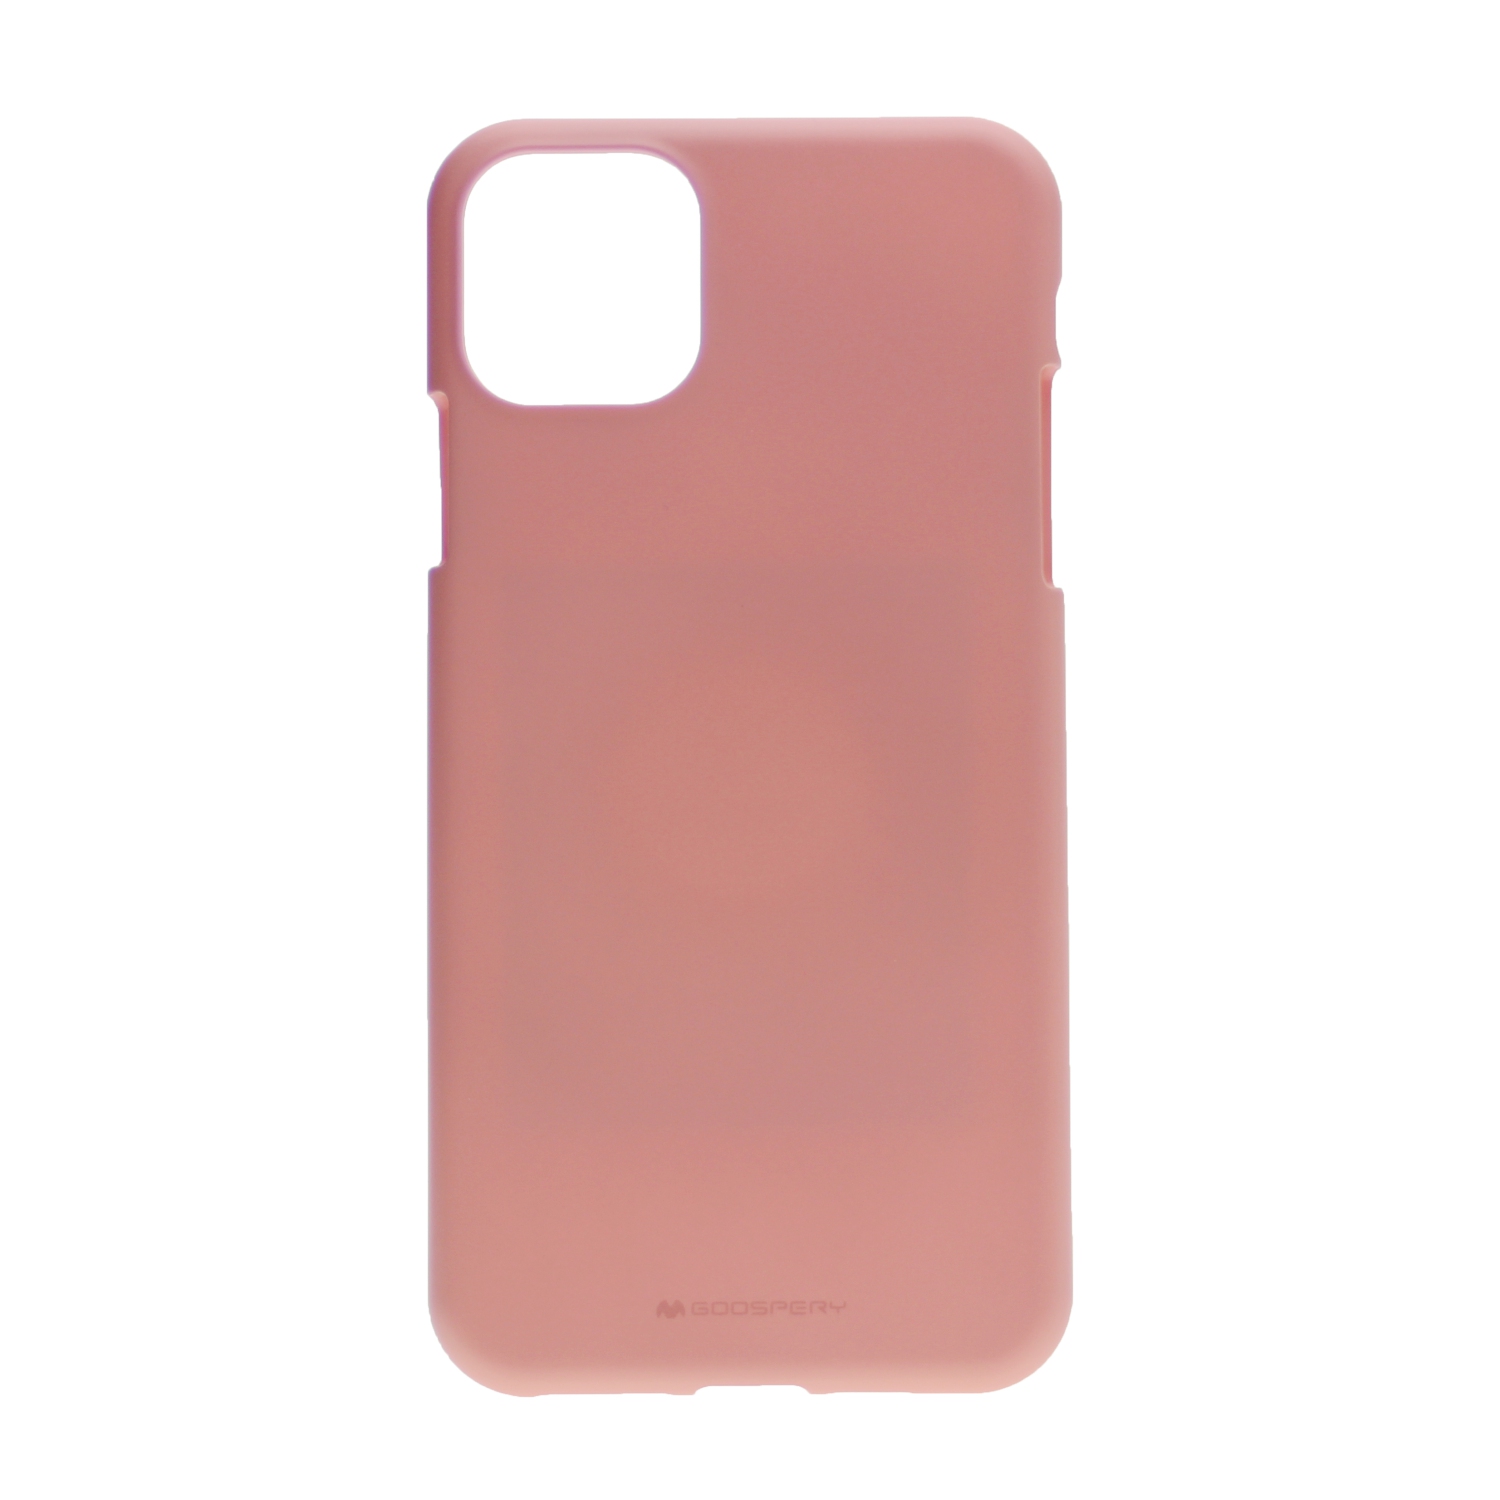 TopSave Goospery Soft Feeling Jelly Silky Slim Bumper Case For iPhone 13 Pro Max (6.7), Pink